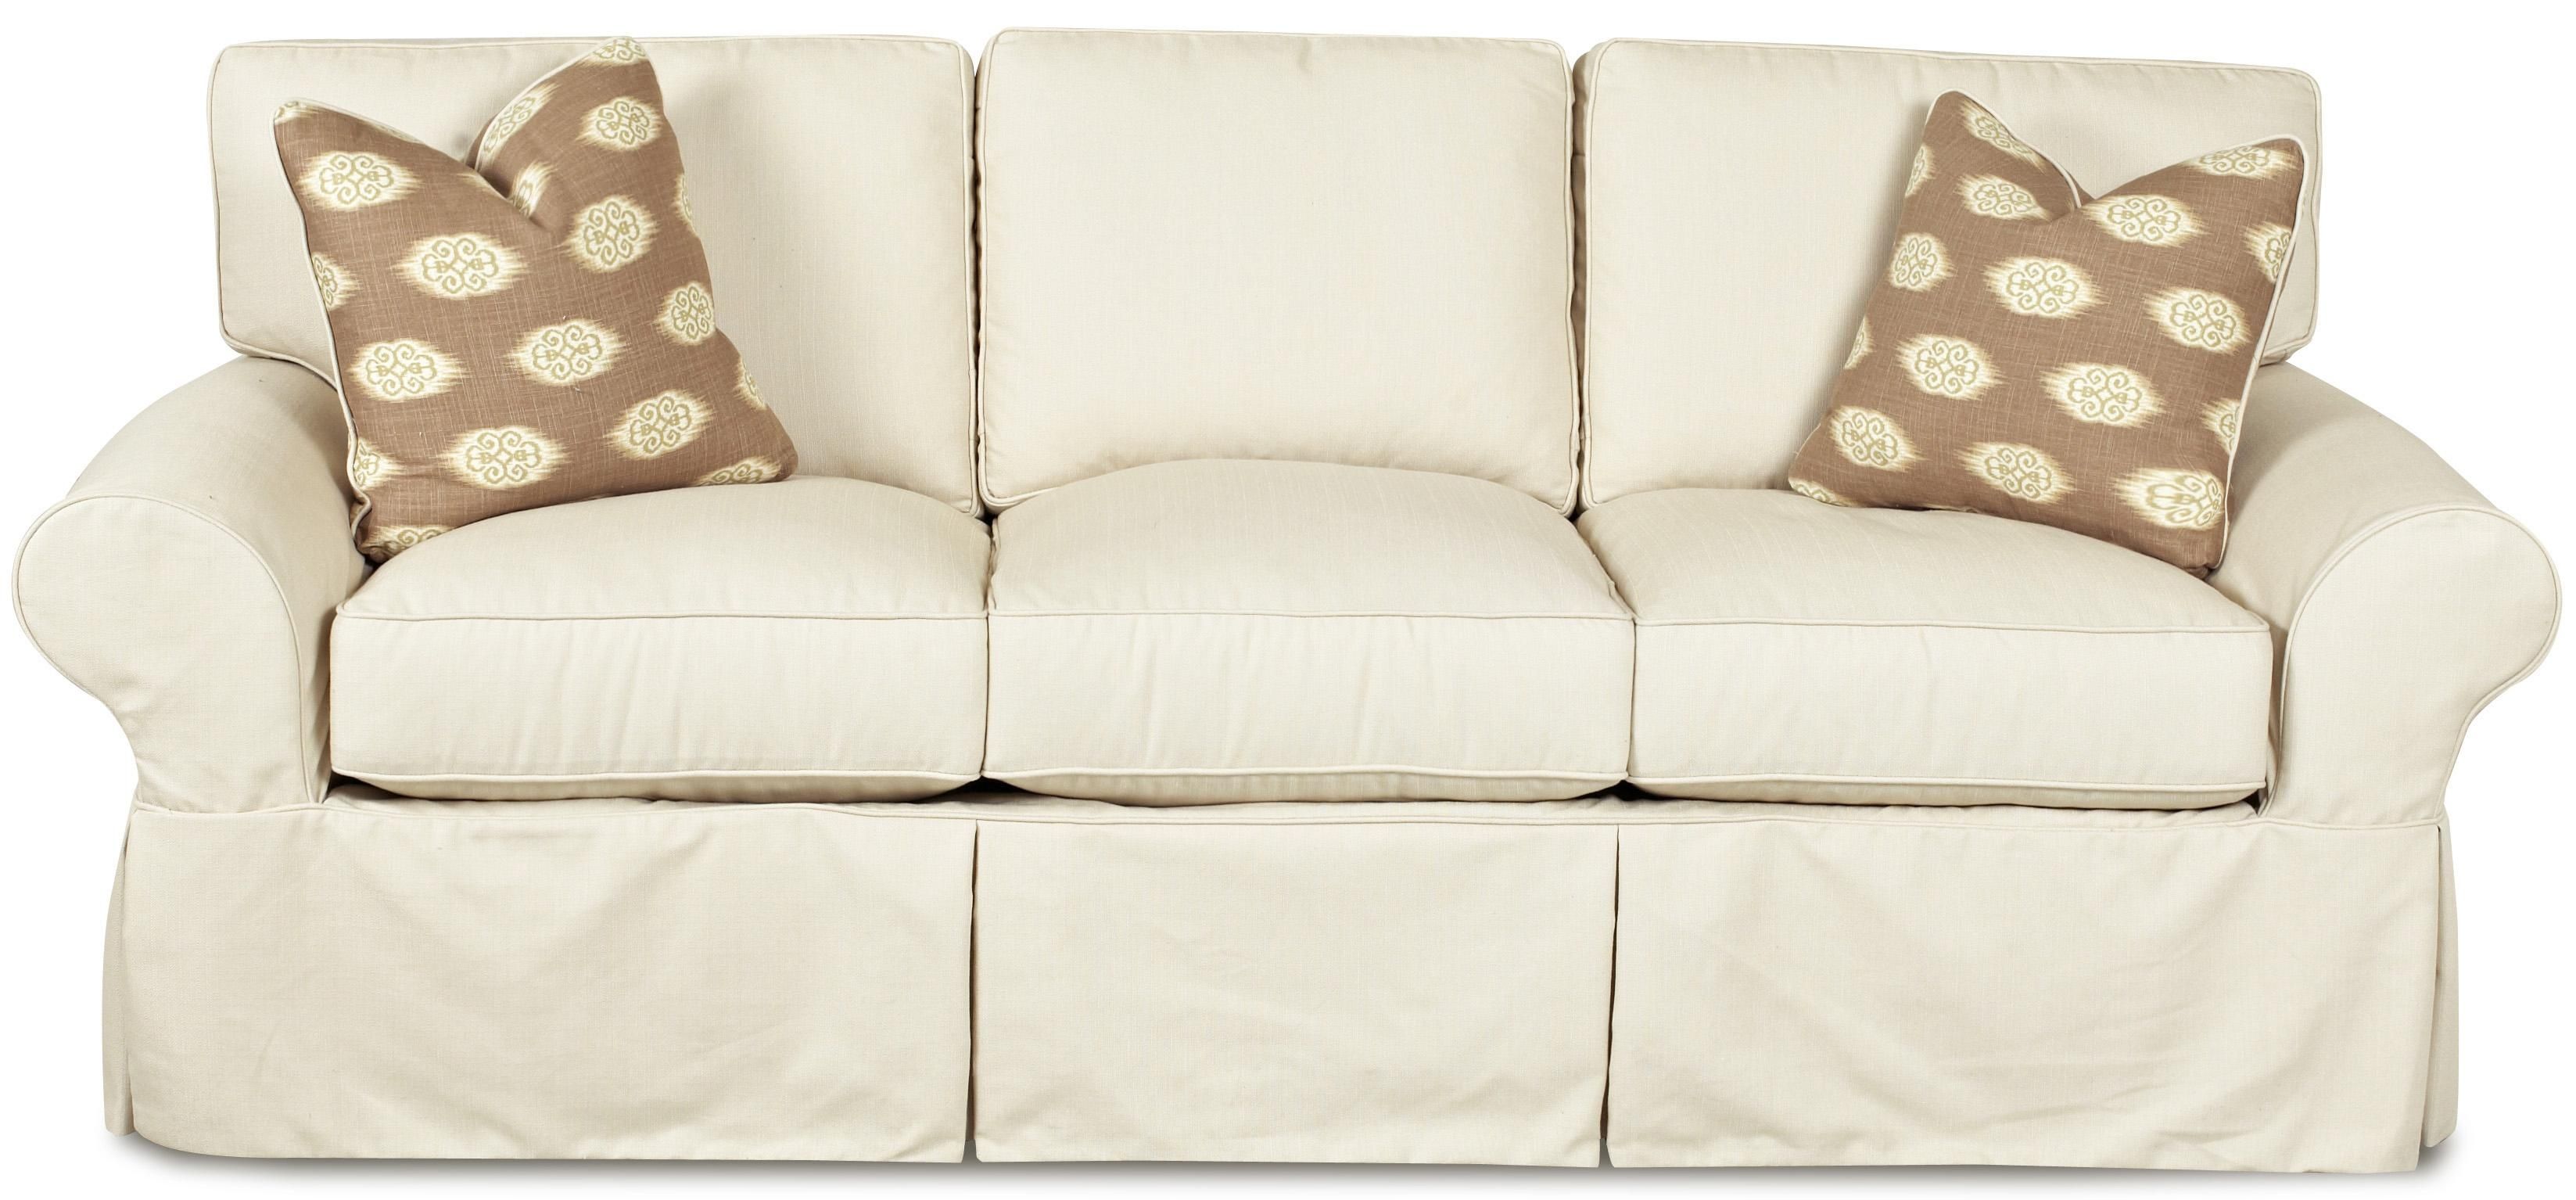 Sofas Center Reclining Sofa Covers Overstuffed Chair Cover Throughout Clearance Sofa Covers (Photo 7 of 15)